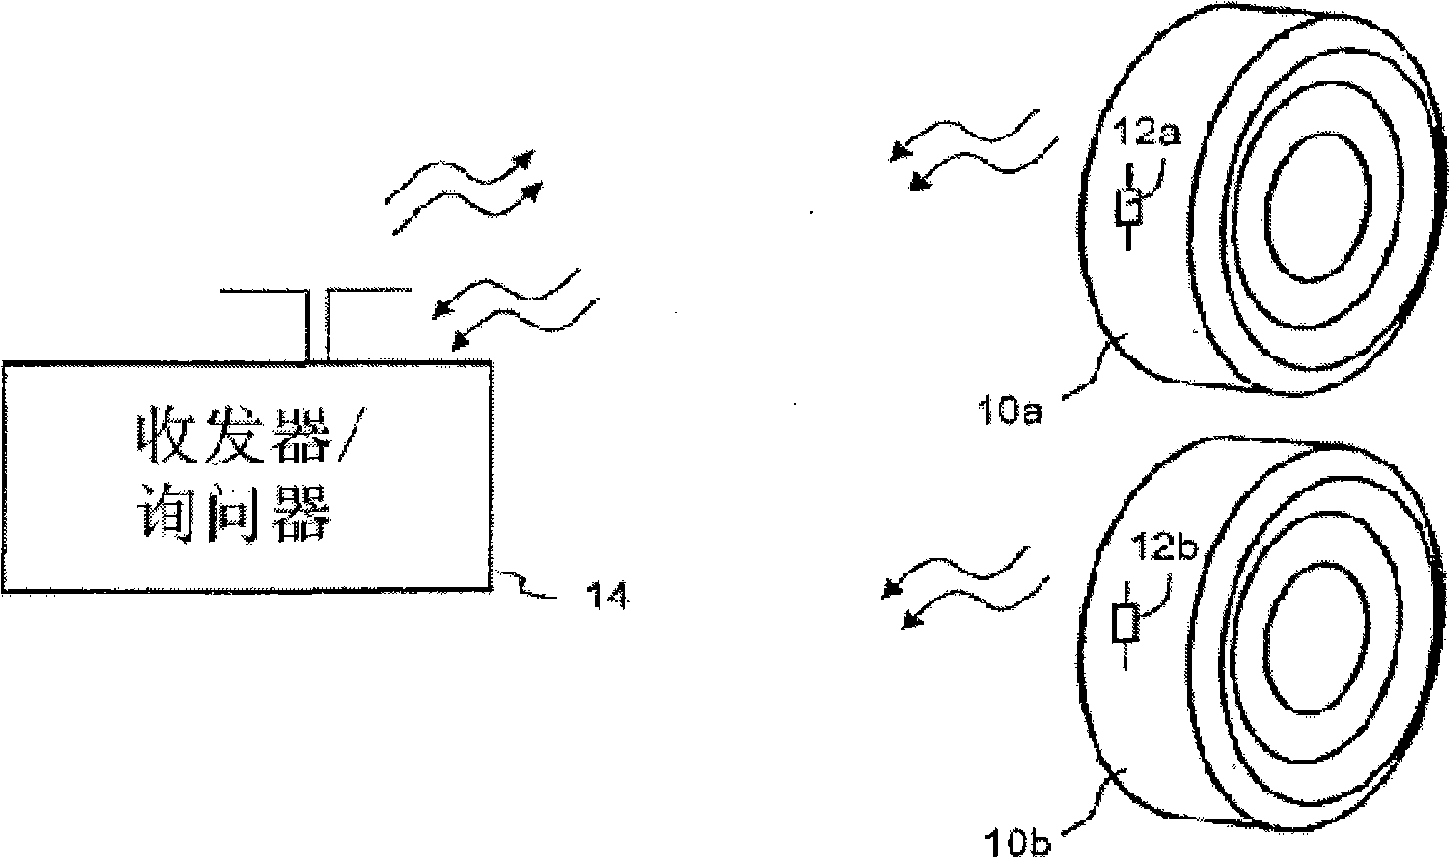 System and method for interrogating a saw via direct physical connection